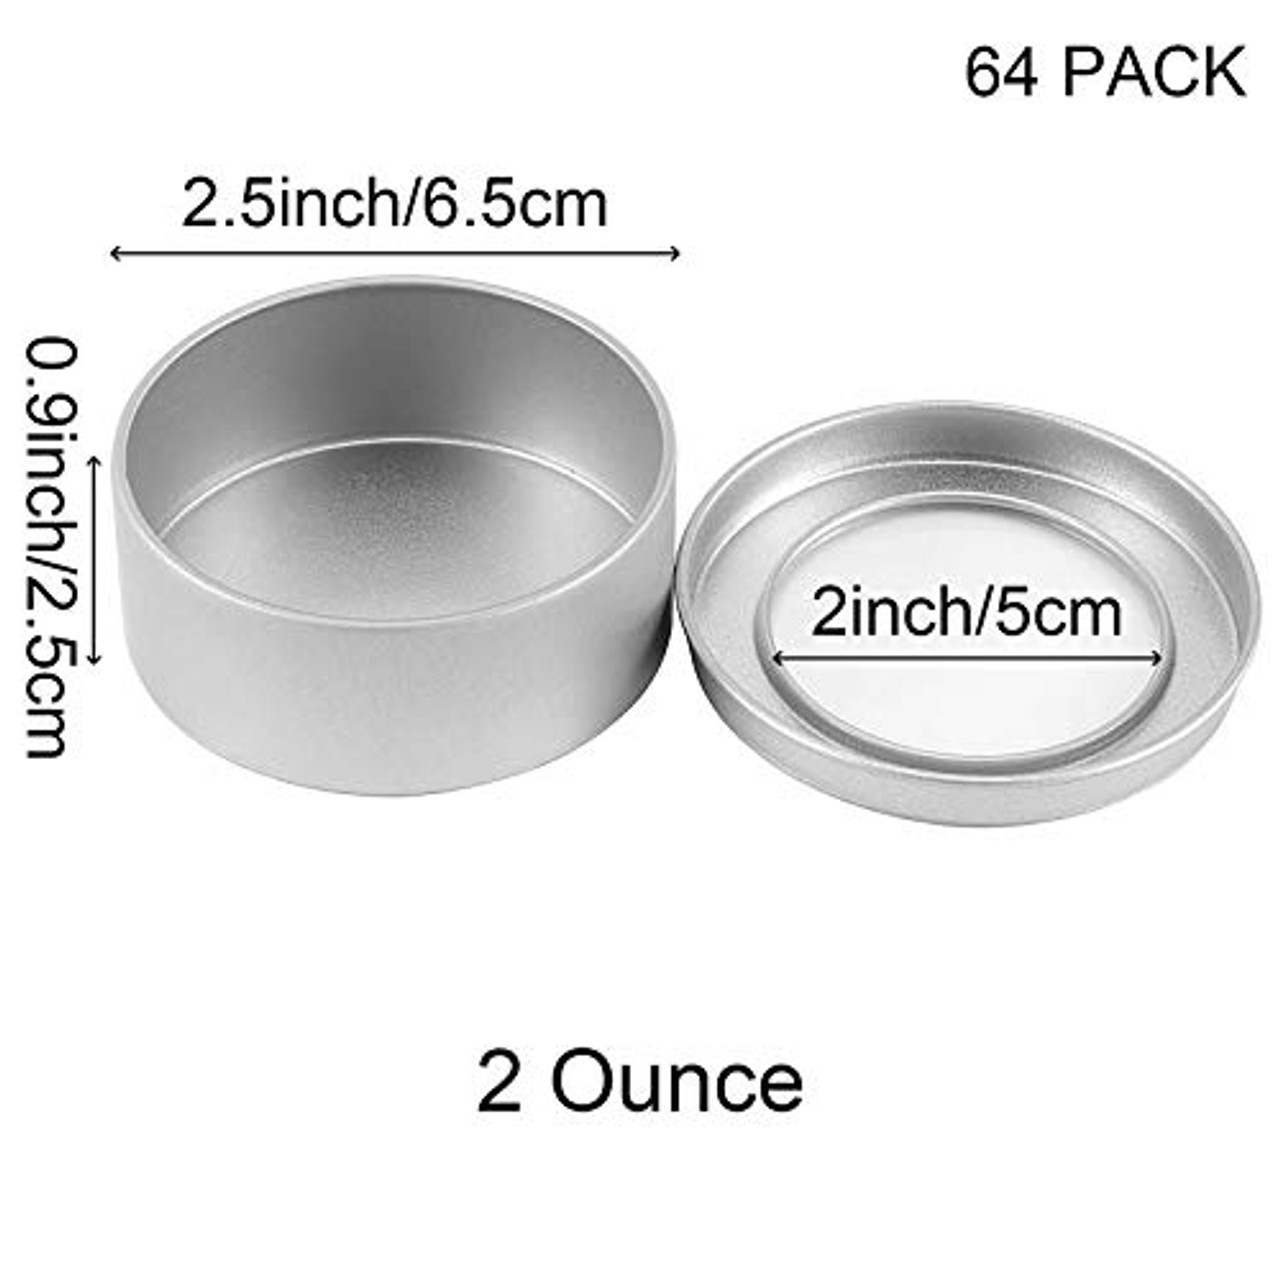 20 Pack 3.5 Ounce Metal Tin Cans, Round Empty Container Cans with Clear Top, Storage Cans Gift Case for Kitchen, Office, Candles, Candies, Arts & Craf